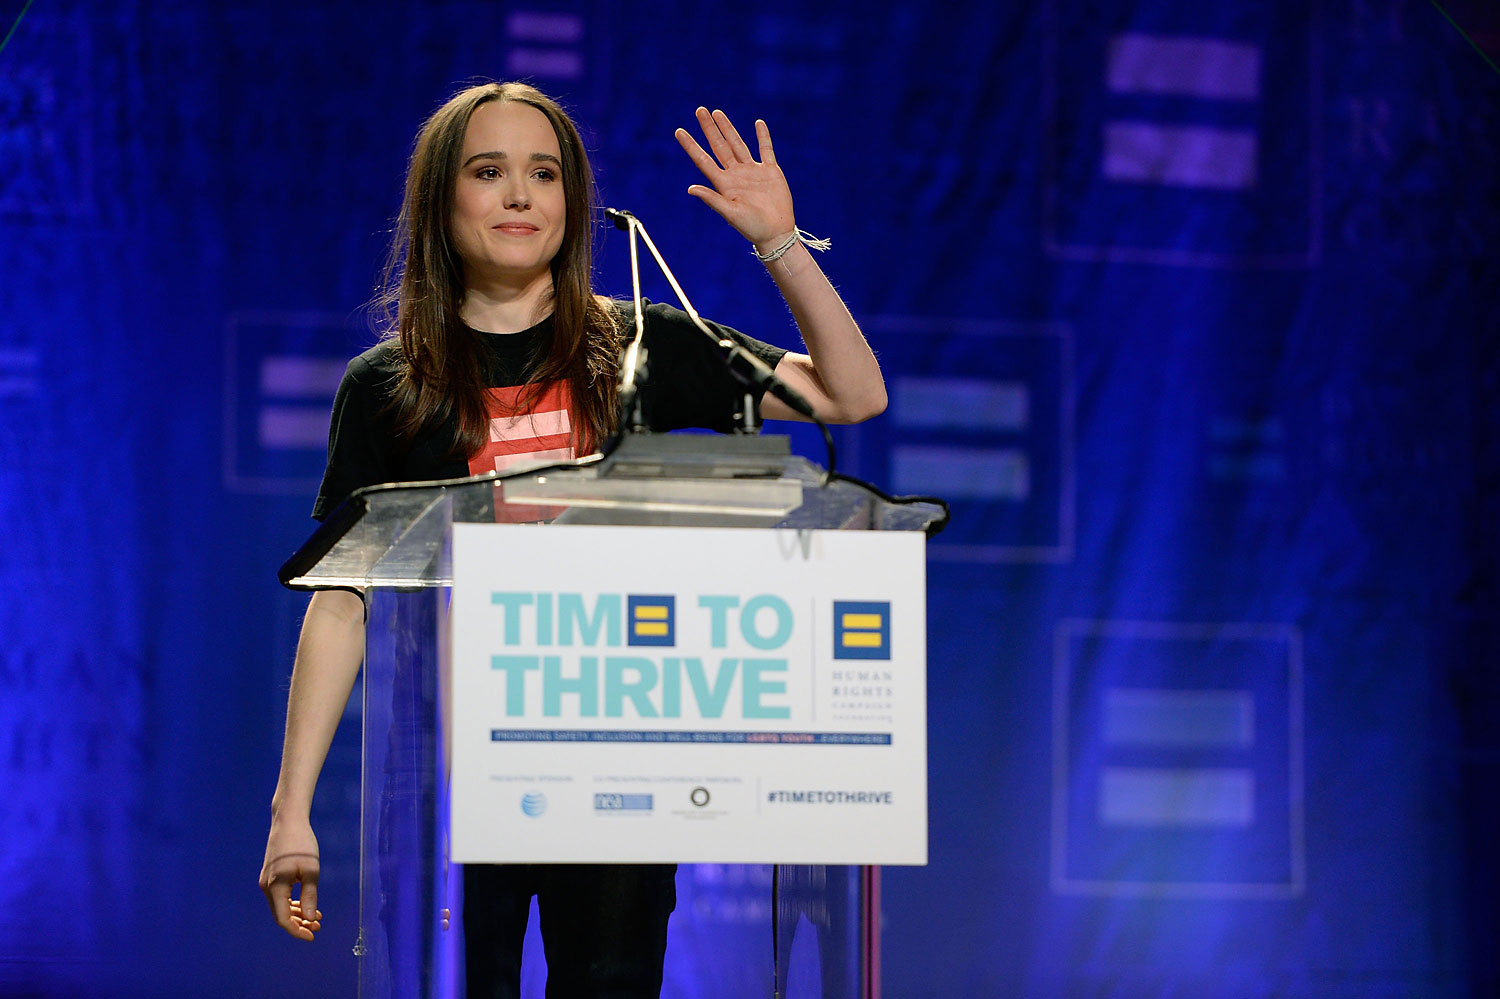 Actress Ellen Page comes out as gay at the Human Rights Campaign's Time to Thrive Conference, on Friday, February, 14, 2014 in Las Vegas. (Jeff Bottari/AP Images for Human Rights Campaign)